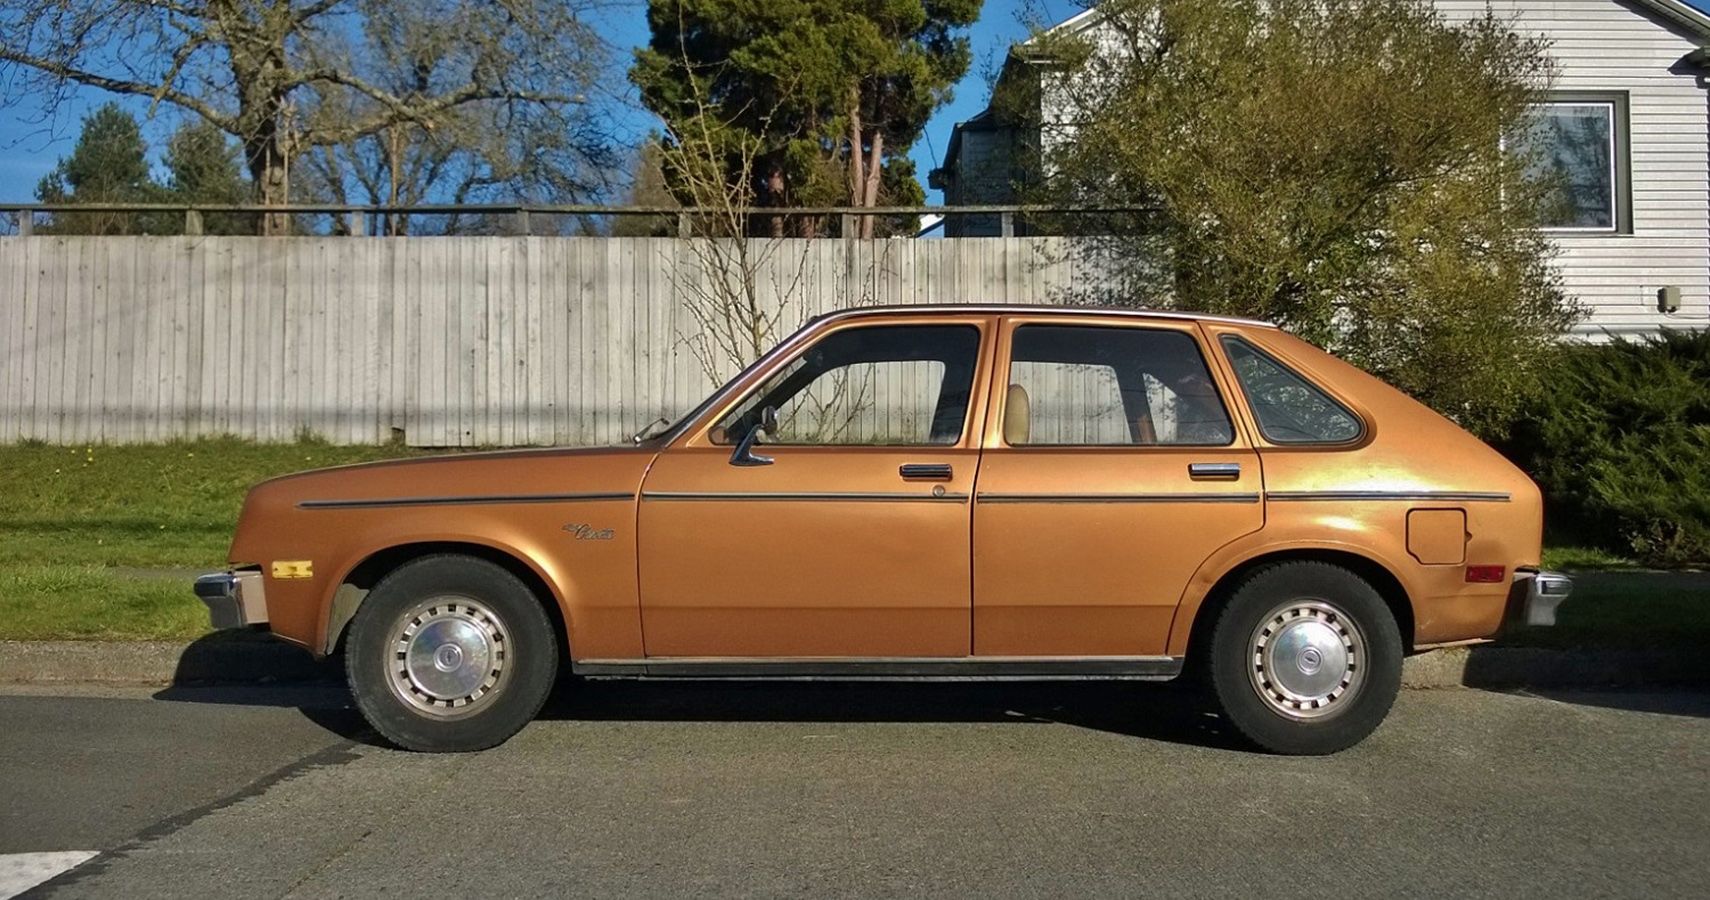 The Chevette Gave Chevrolet Enough Time To Downsize Its Other Cars And Add Fuel-Saving Measures To Its Hit Marques